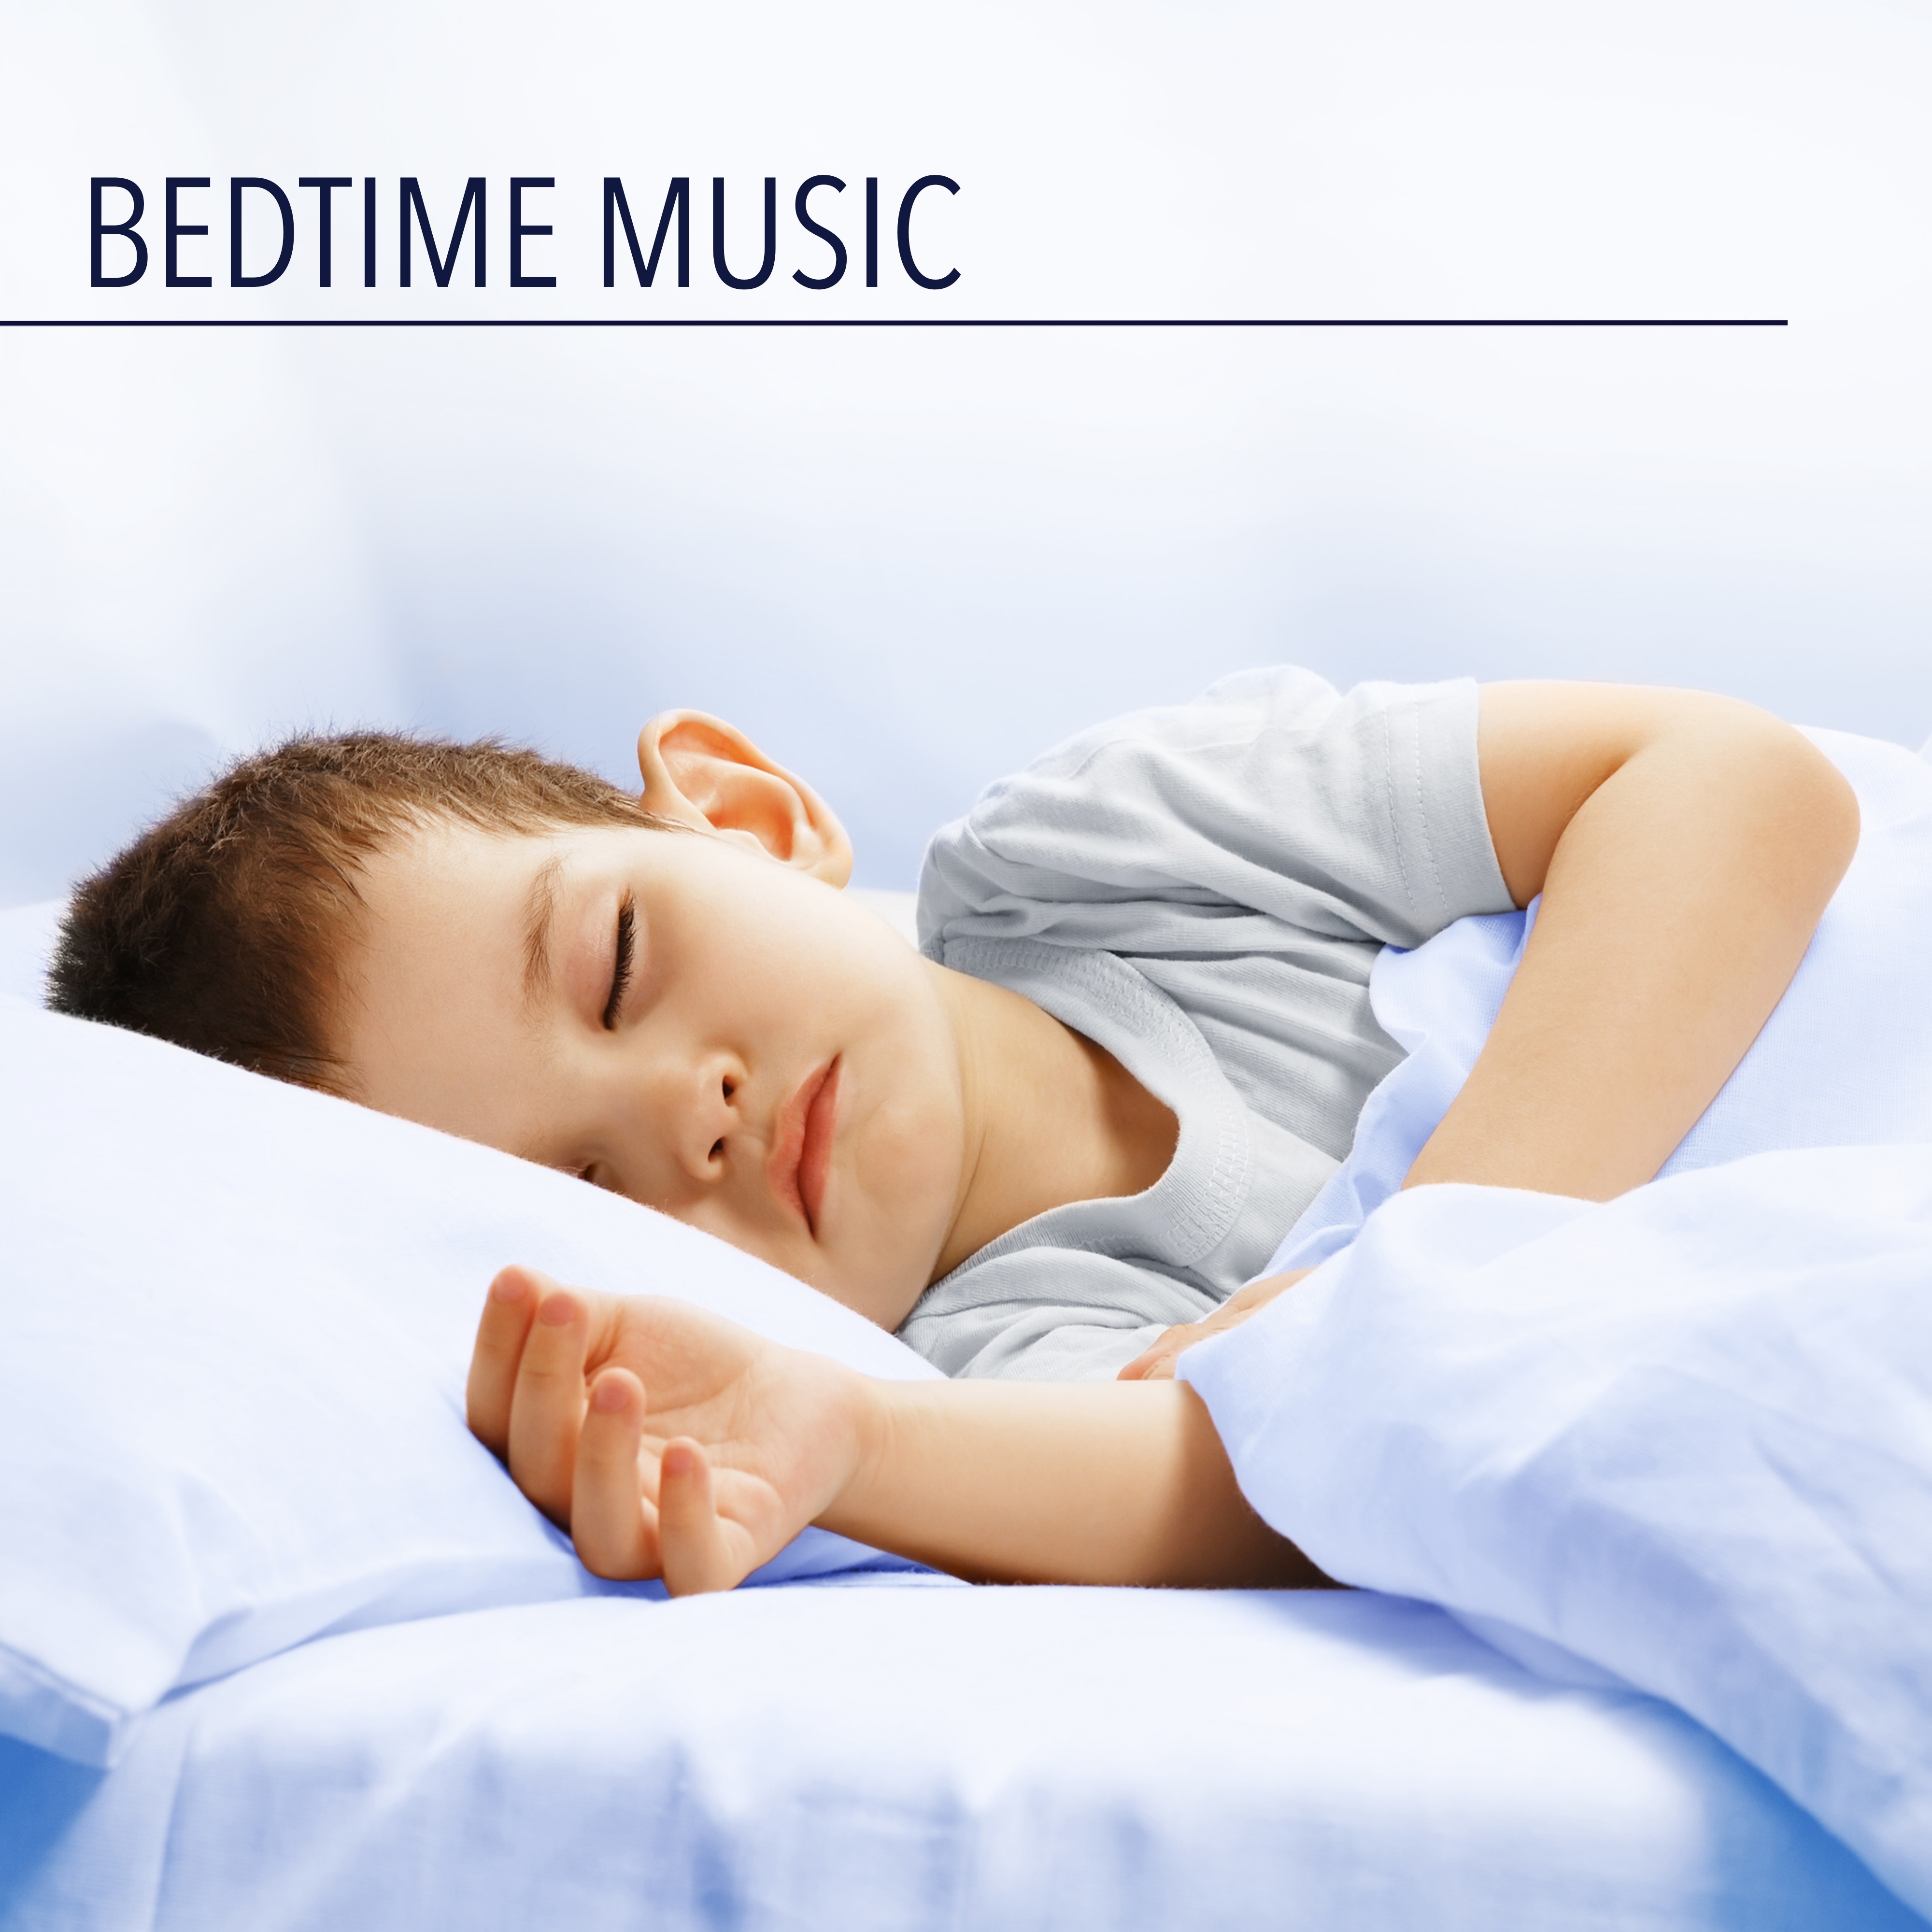 Bedtime Music - Sound of Water and Nature Noises for Baby Sleep, Newborn, Toddlers and Pregnant Mothers